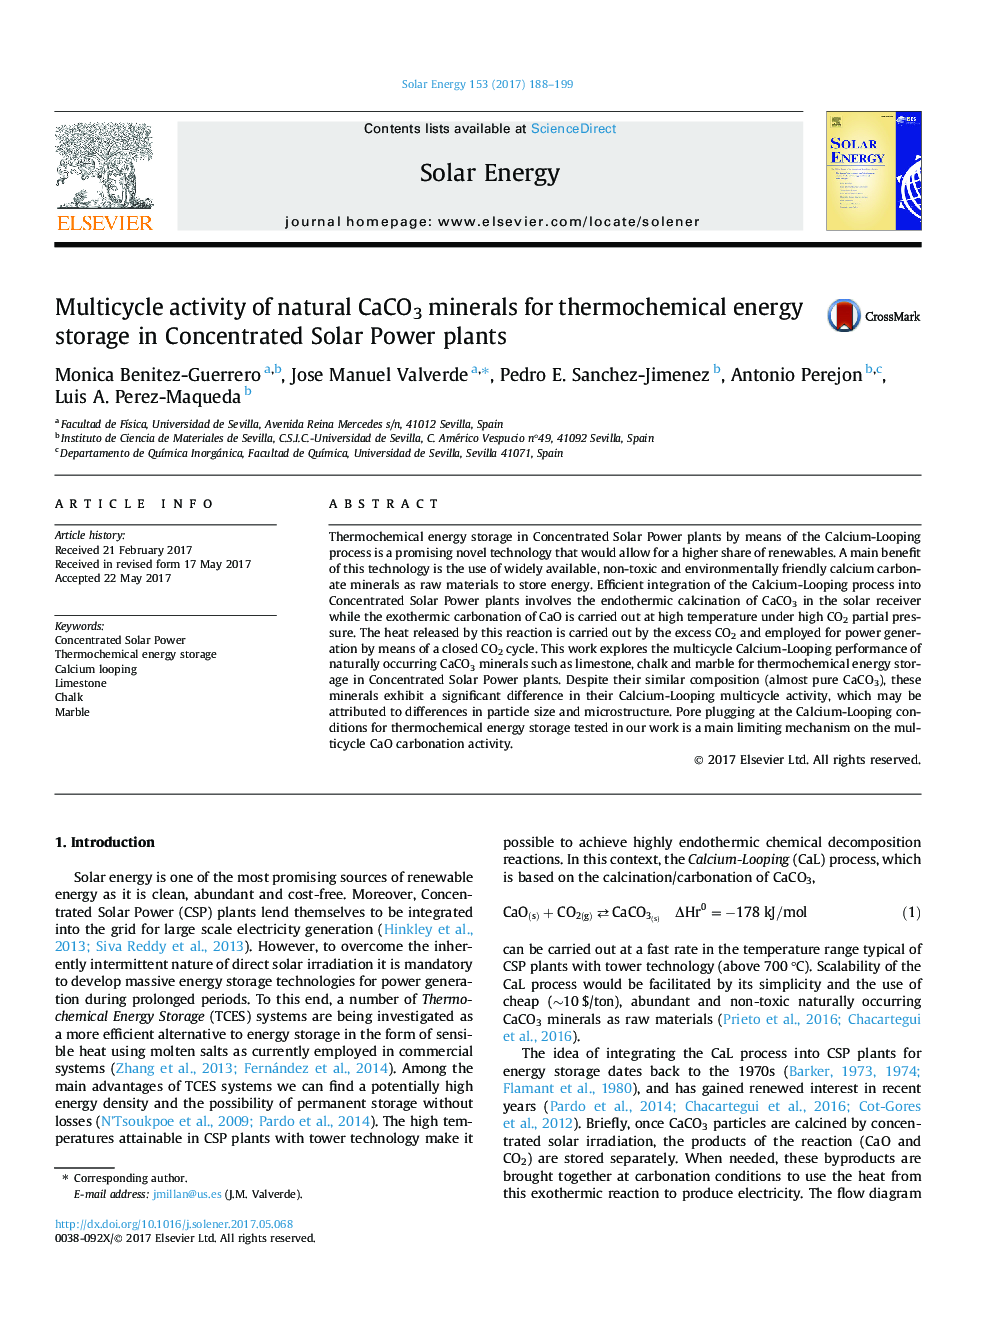 Multicycle activity of natural CaCO3 minerals for thermochemical energy storage in Concentrated Solar Power plants